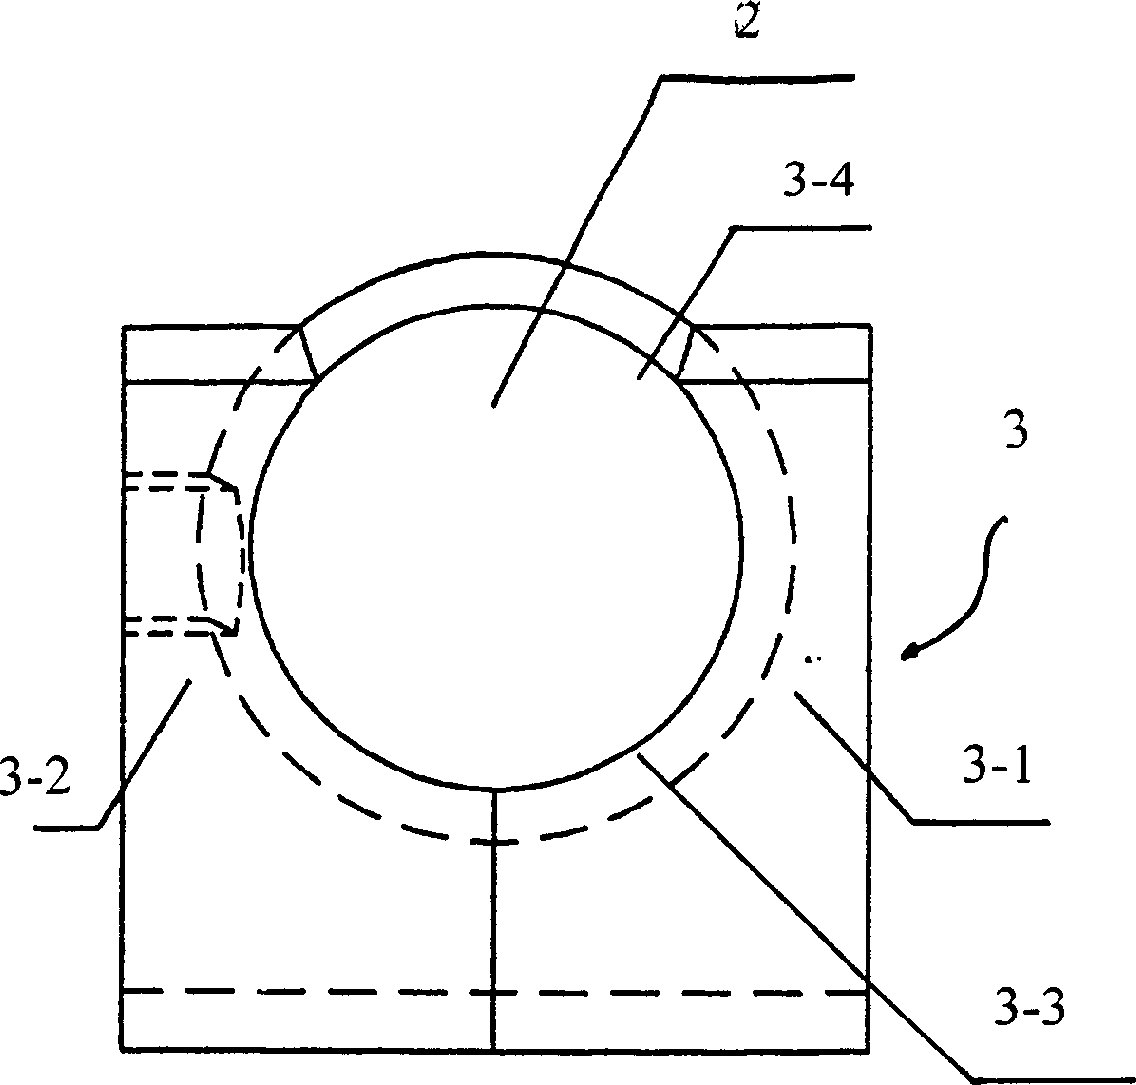 Rolling piston capable of changing sliding friction to rolling friction between piston and cylinder